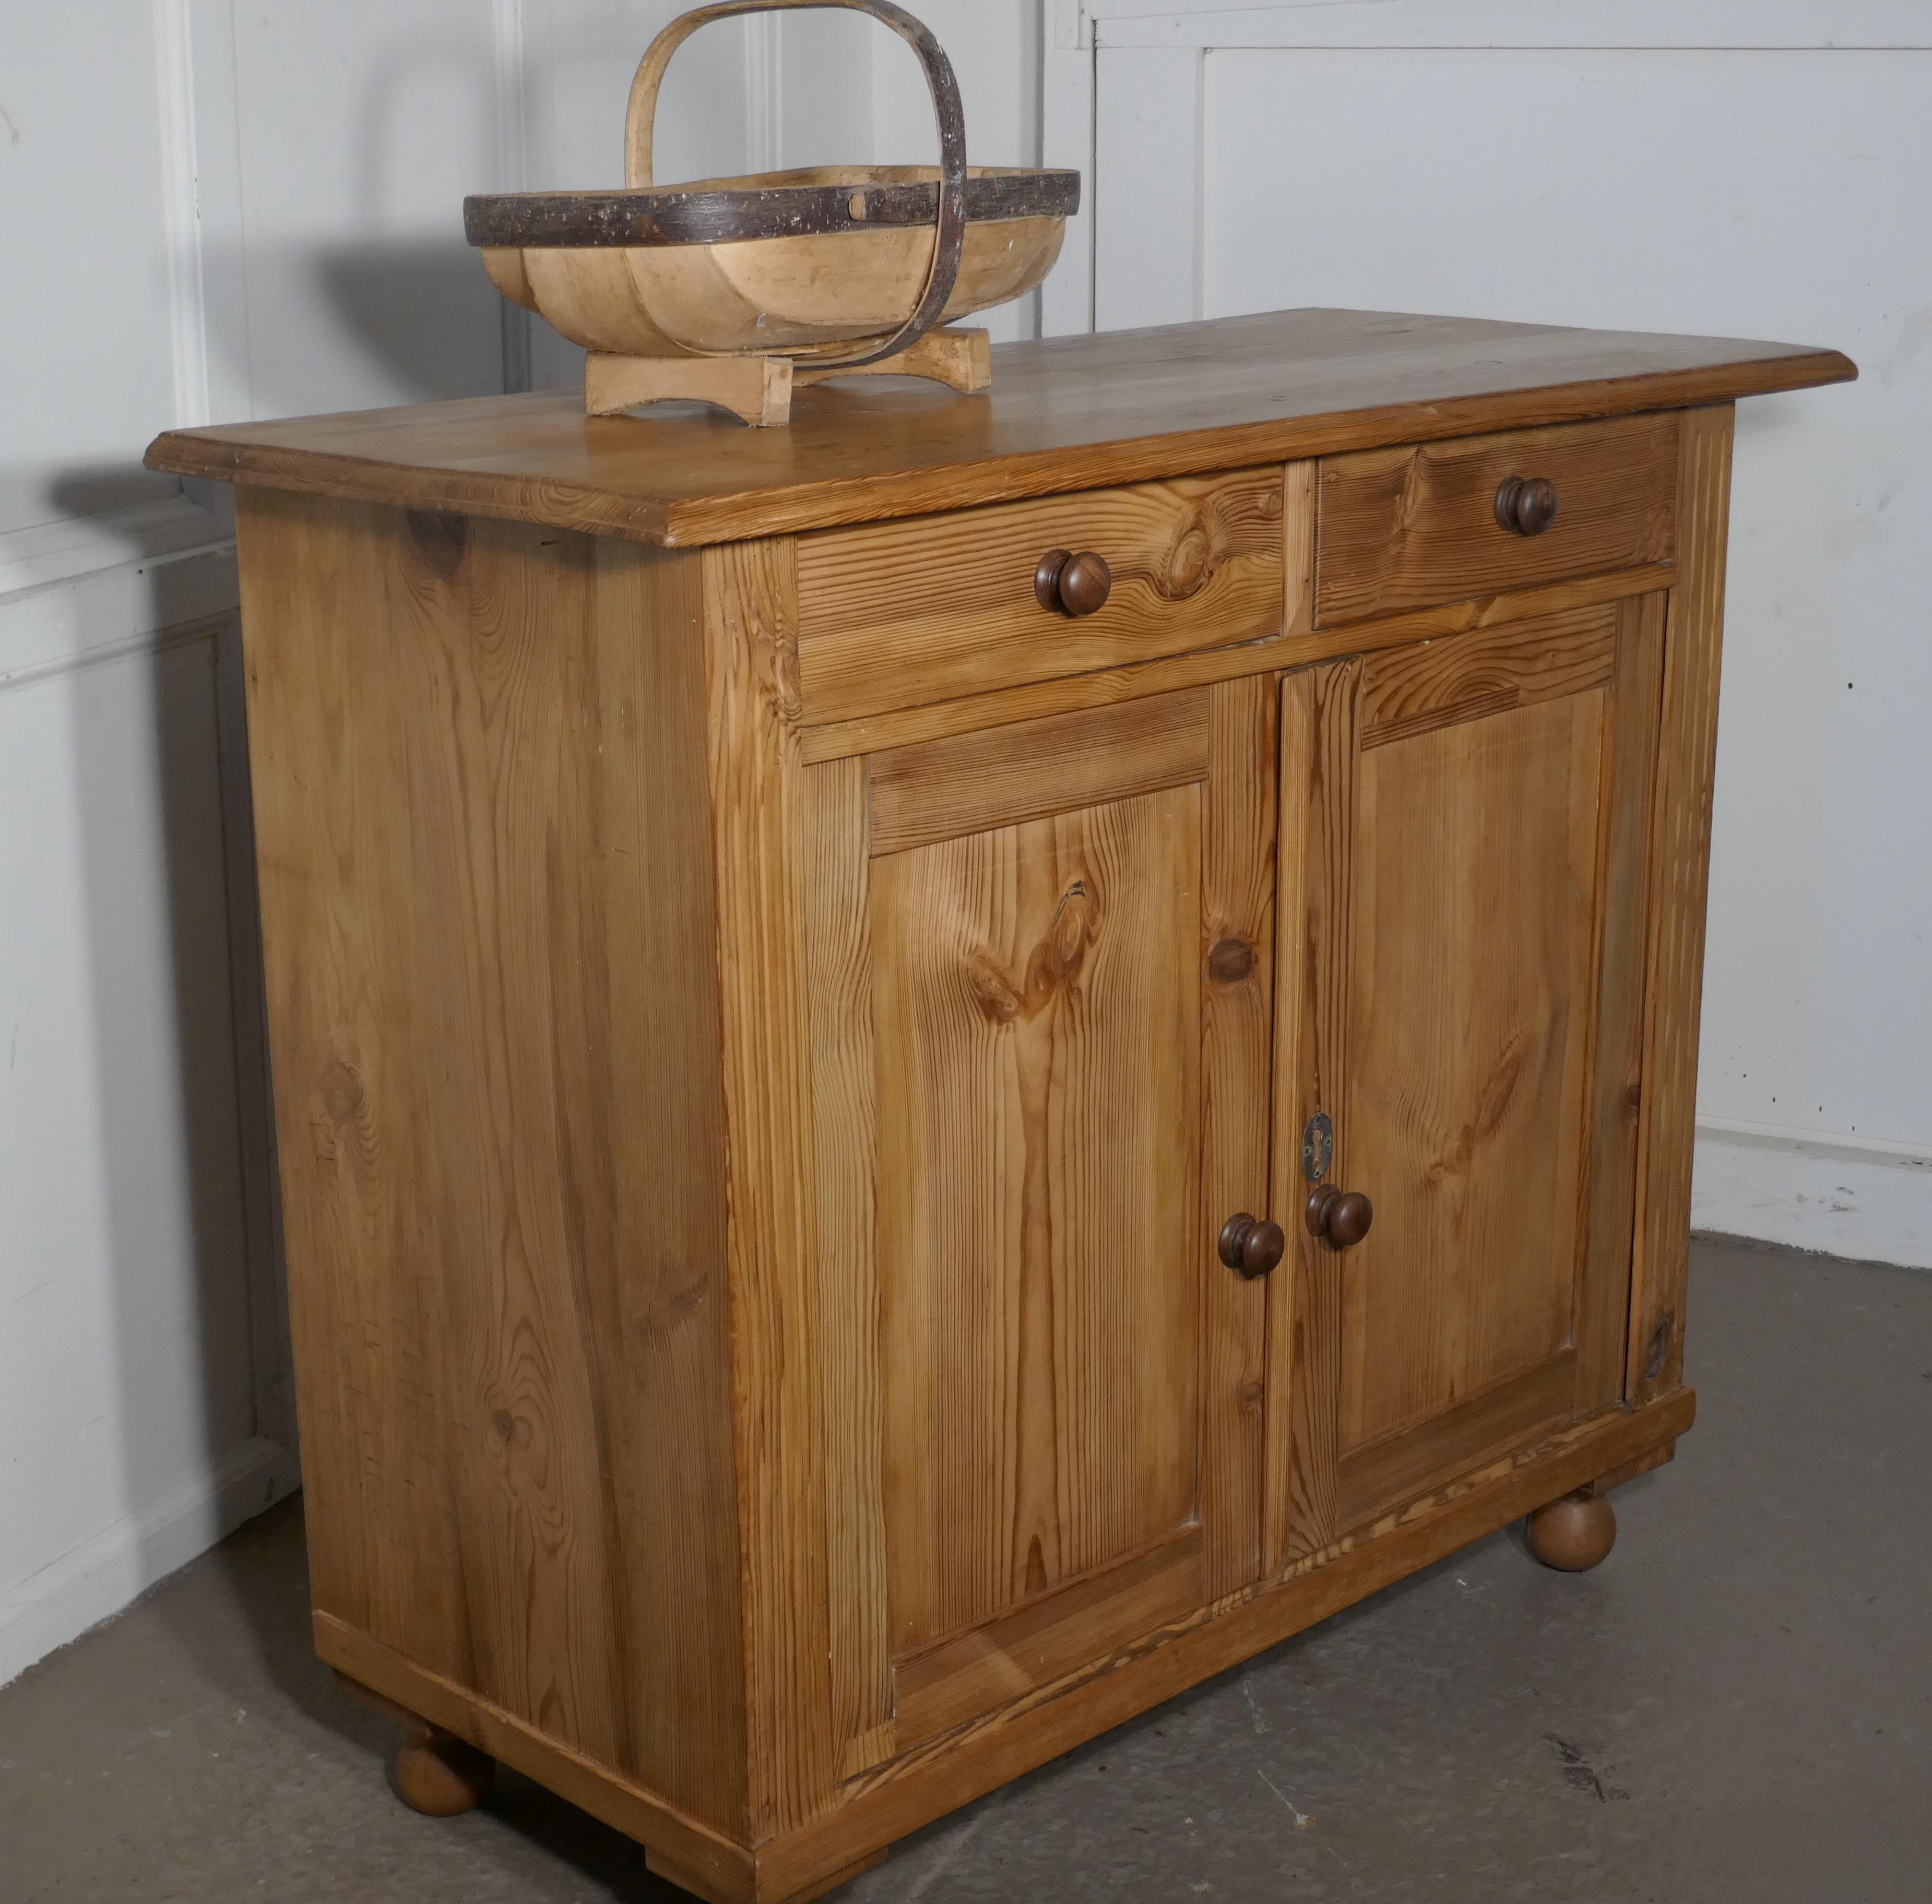 Victorian stripped pine sideboard or cupboard 

This is a very attractive farmhouse Kitchen cupboard, it has 2 drawers and 2 paneled doors enclosing a long shelved cupboard, with turned wooden knobs
The counter top has a molded edge and reeded